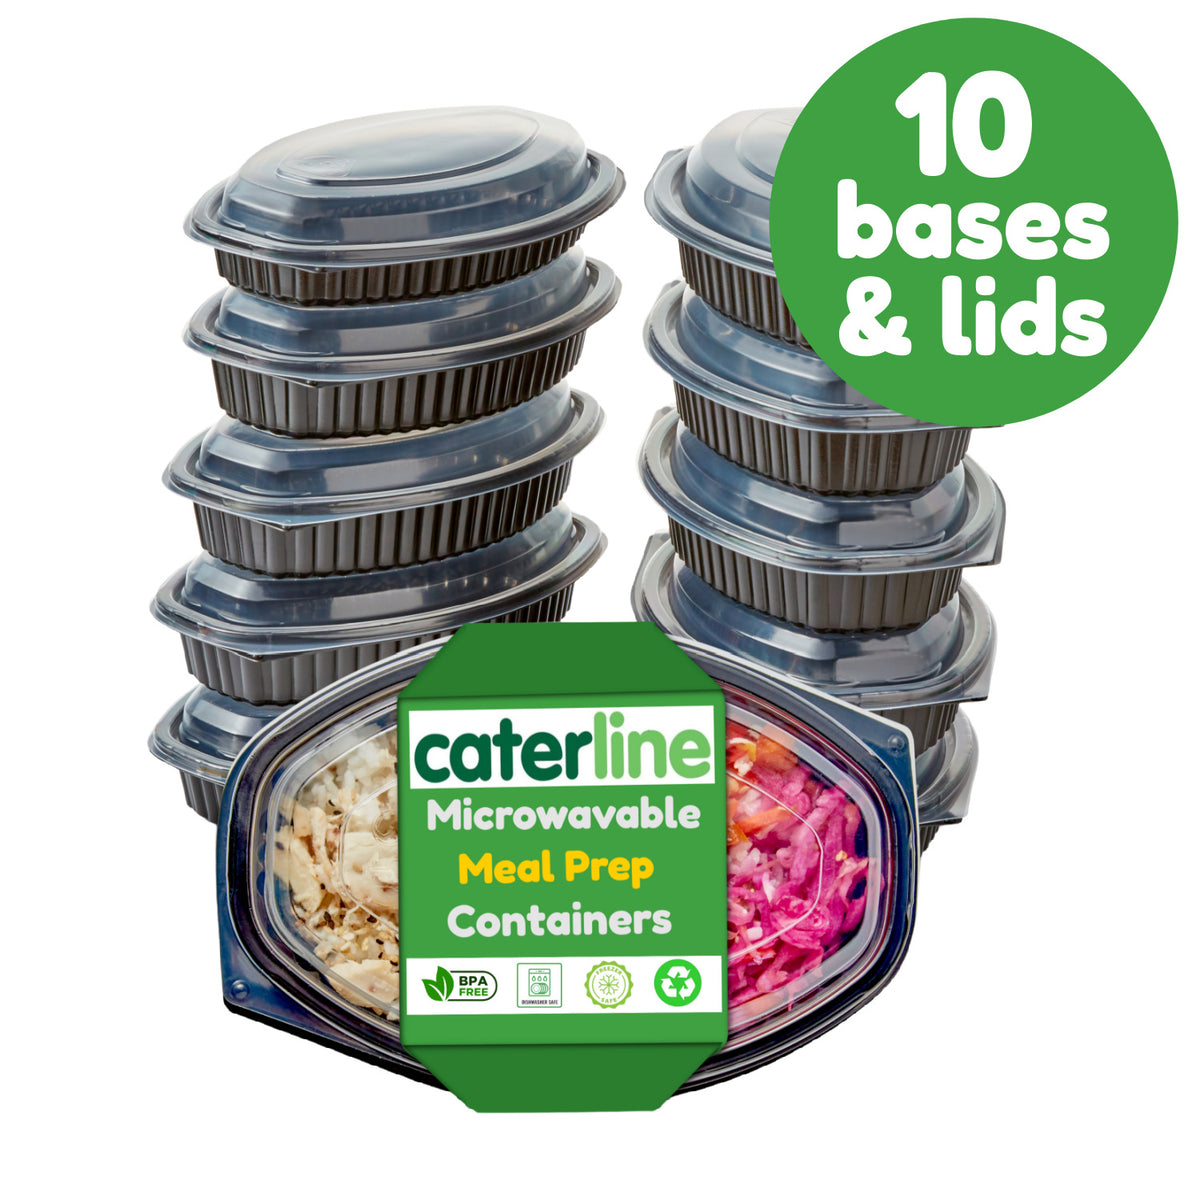 Caterline 10 Microwavable Meal Prep Containers